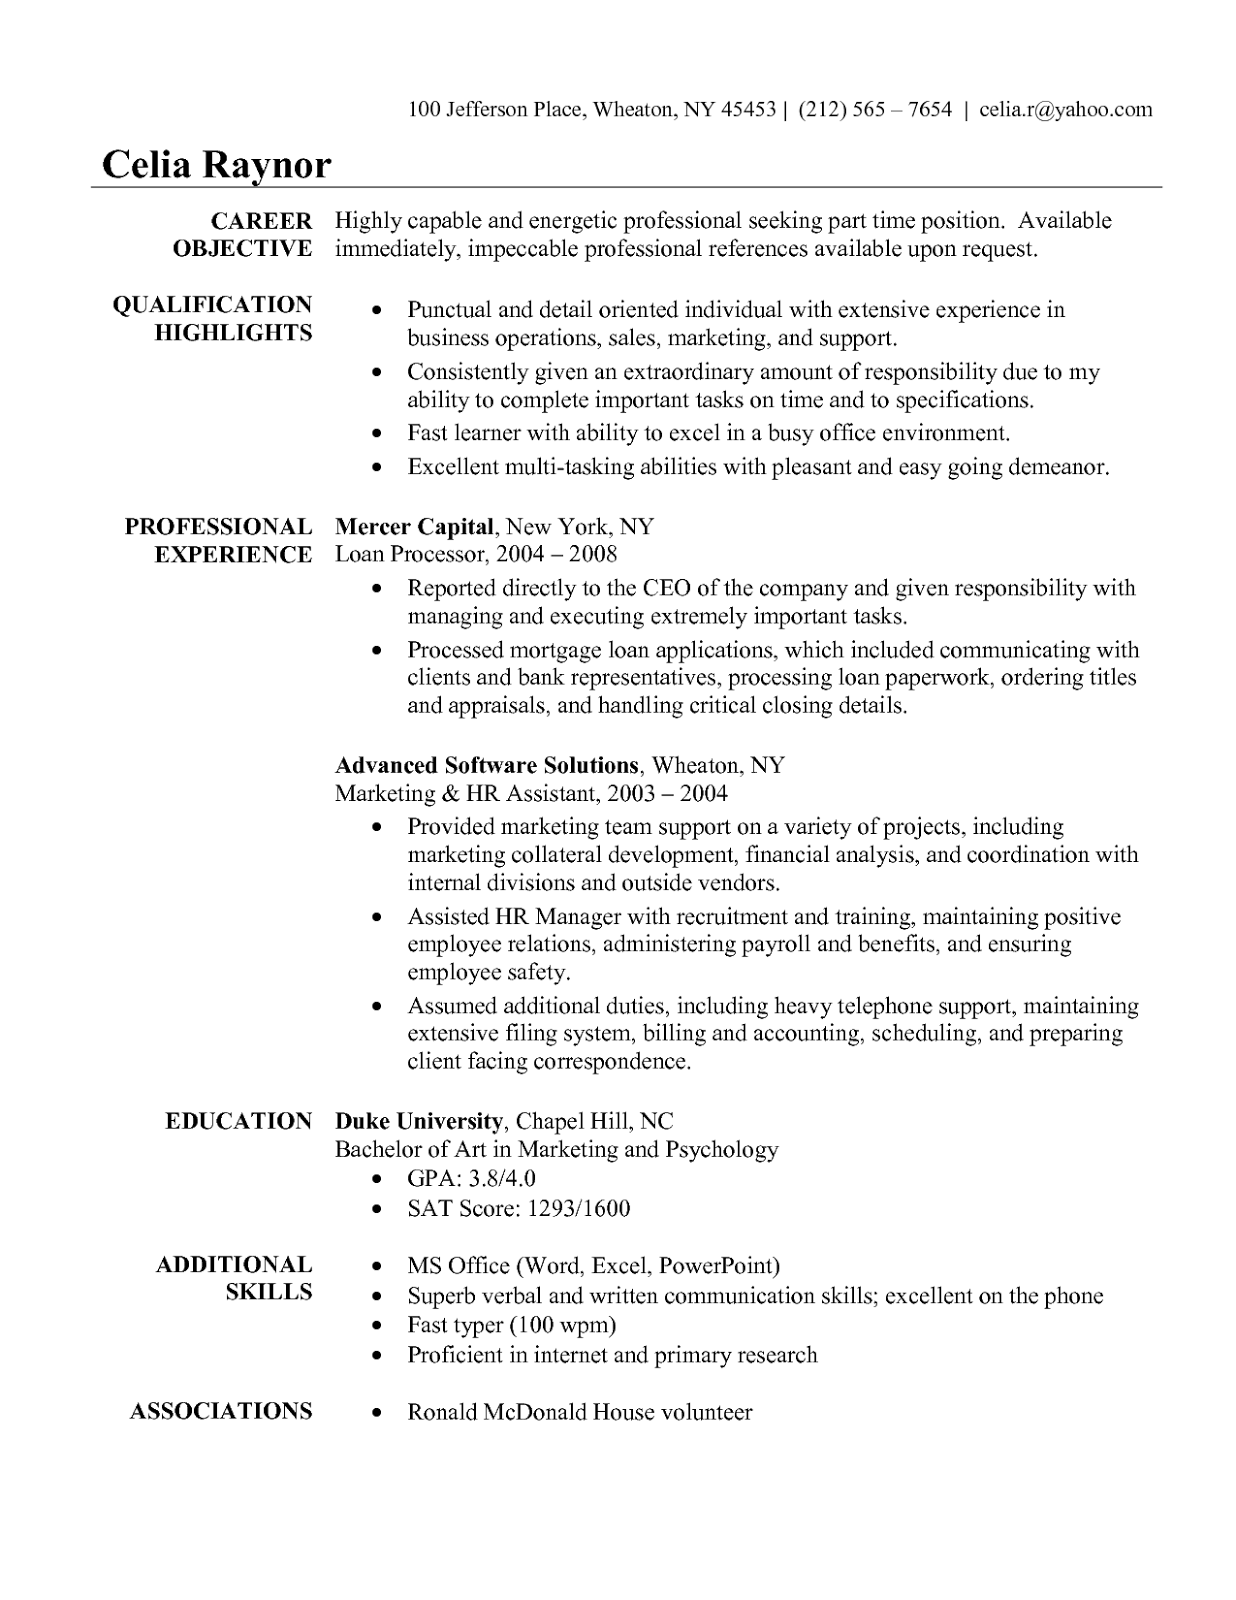 Resume summary for administrative assistant position